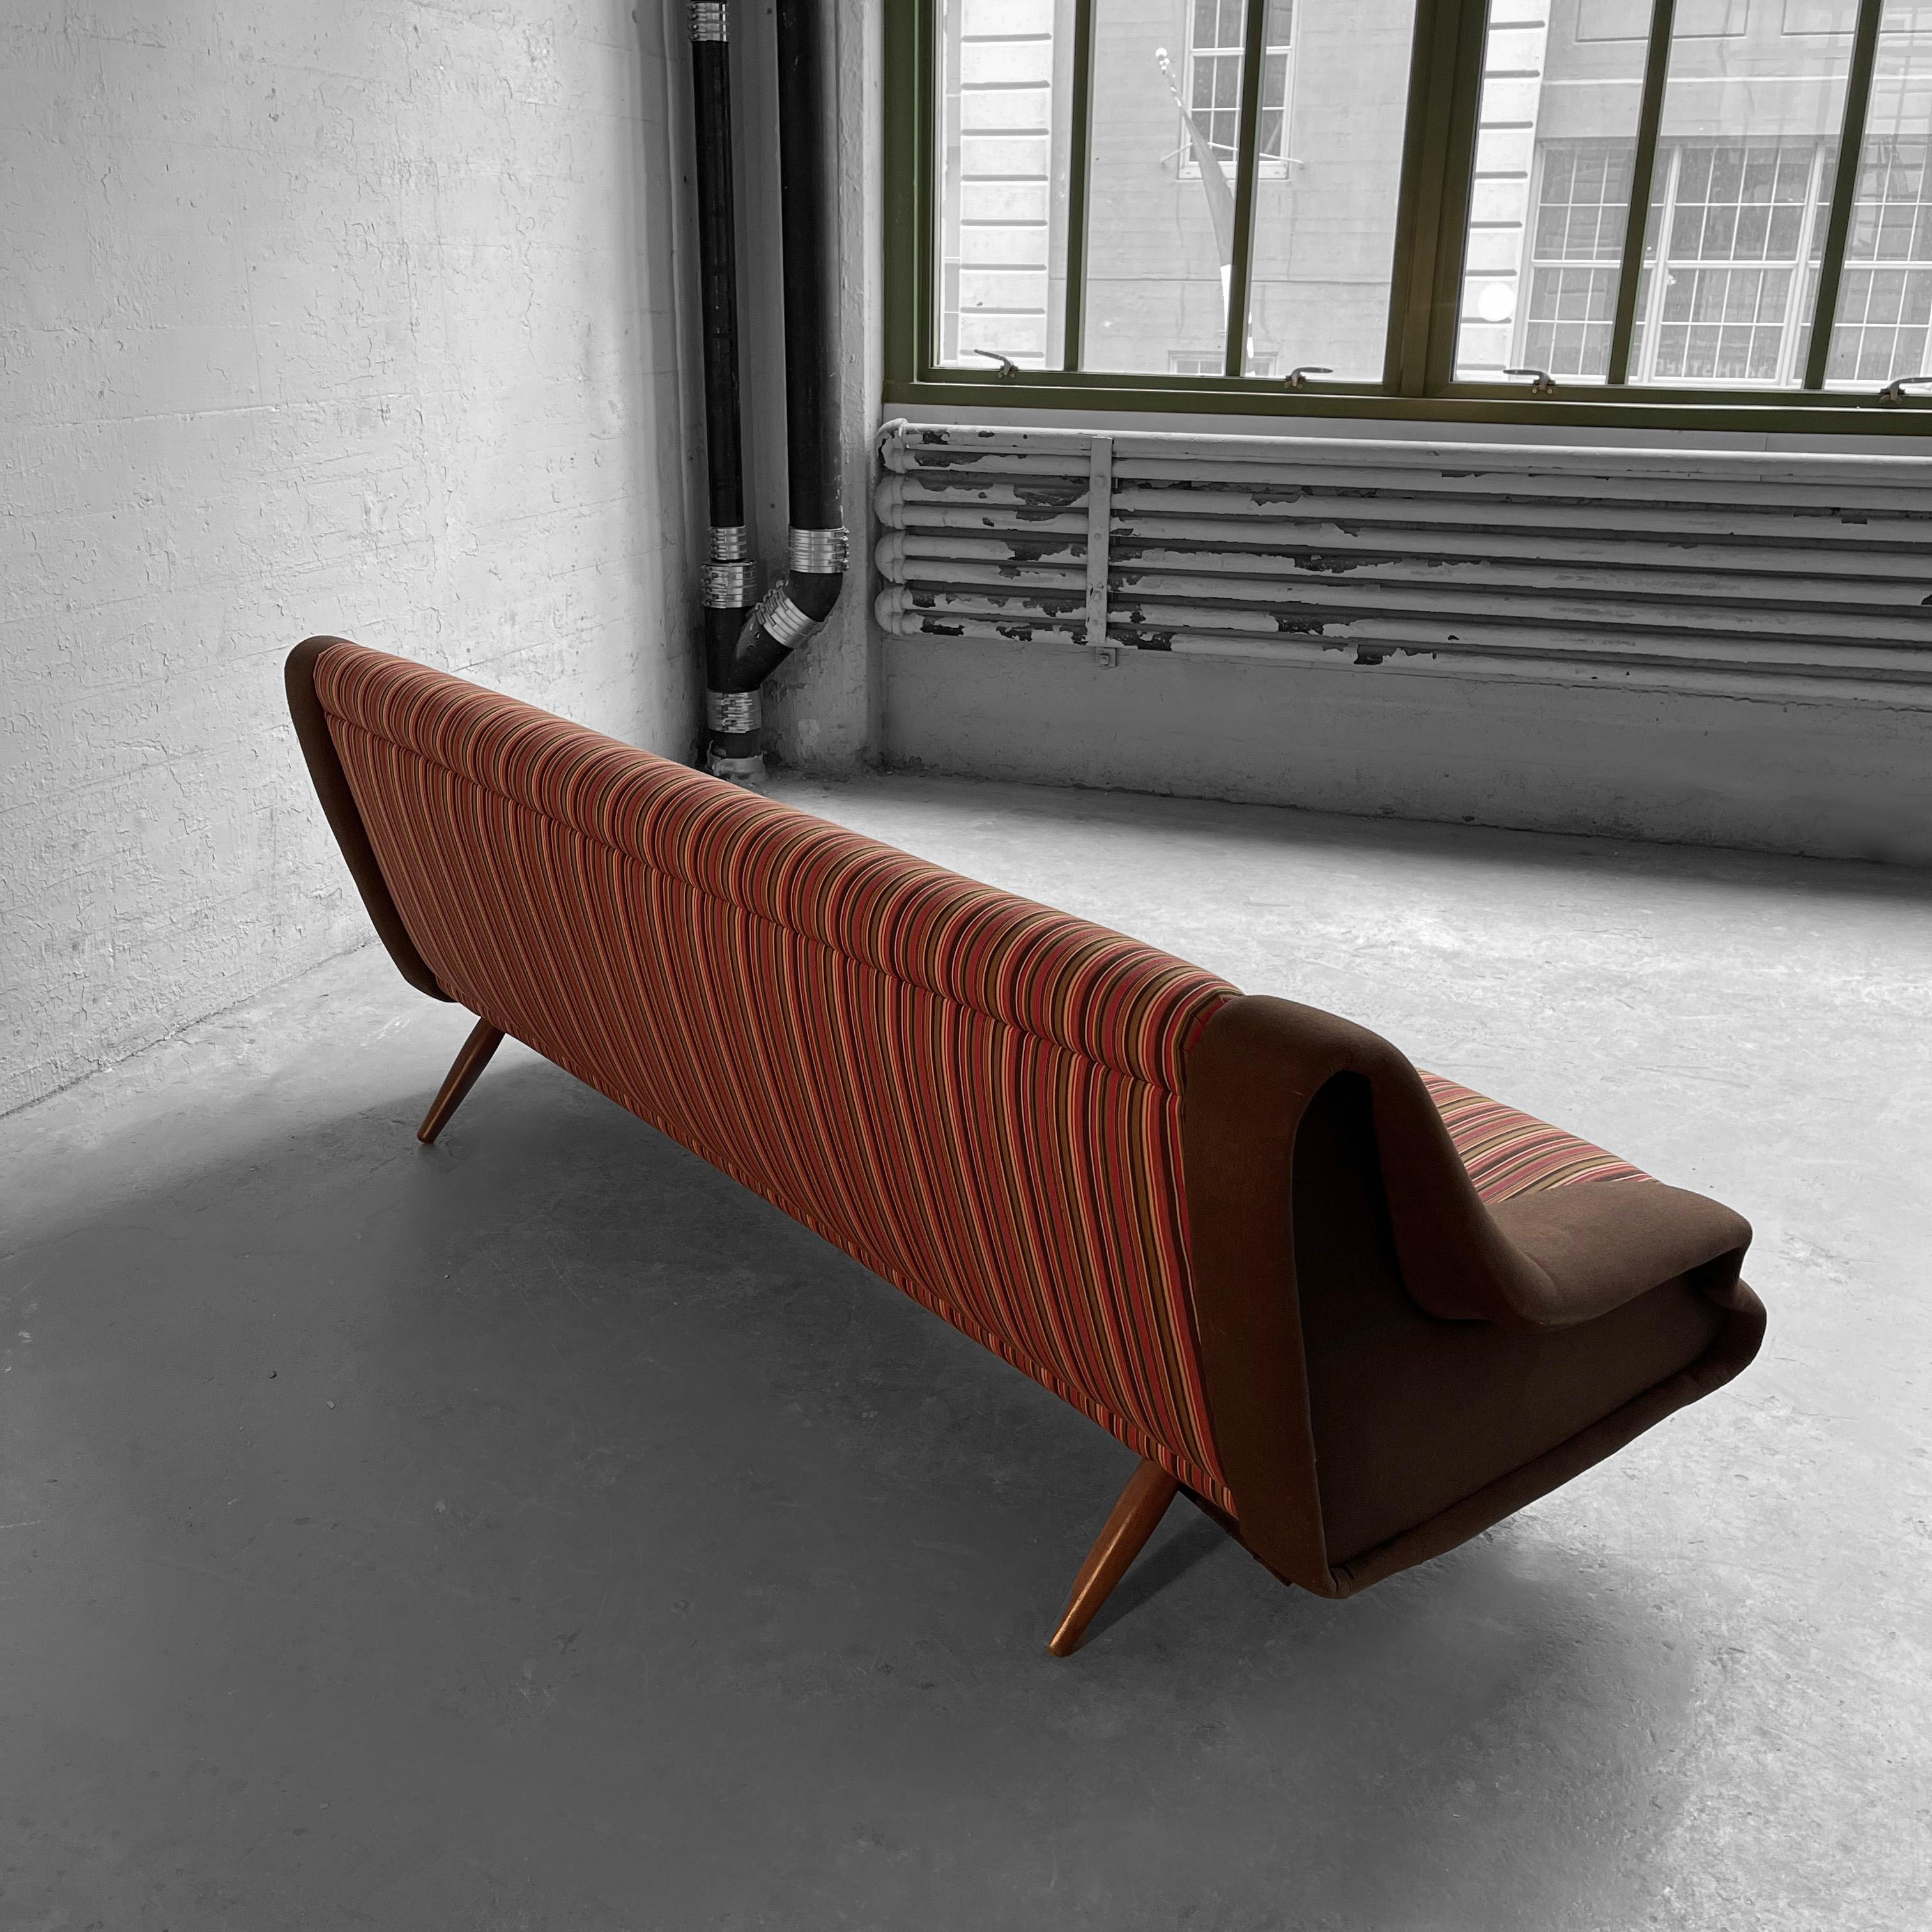 Italian Mid-Century Modern Sofa In The Style Of Marco Zanuso For Sale 1